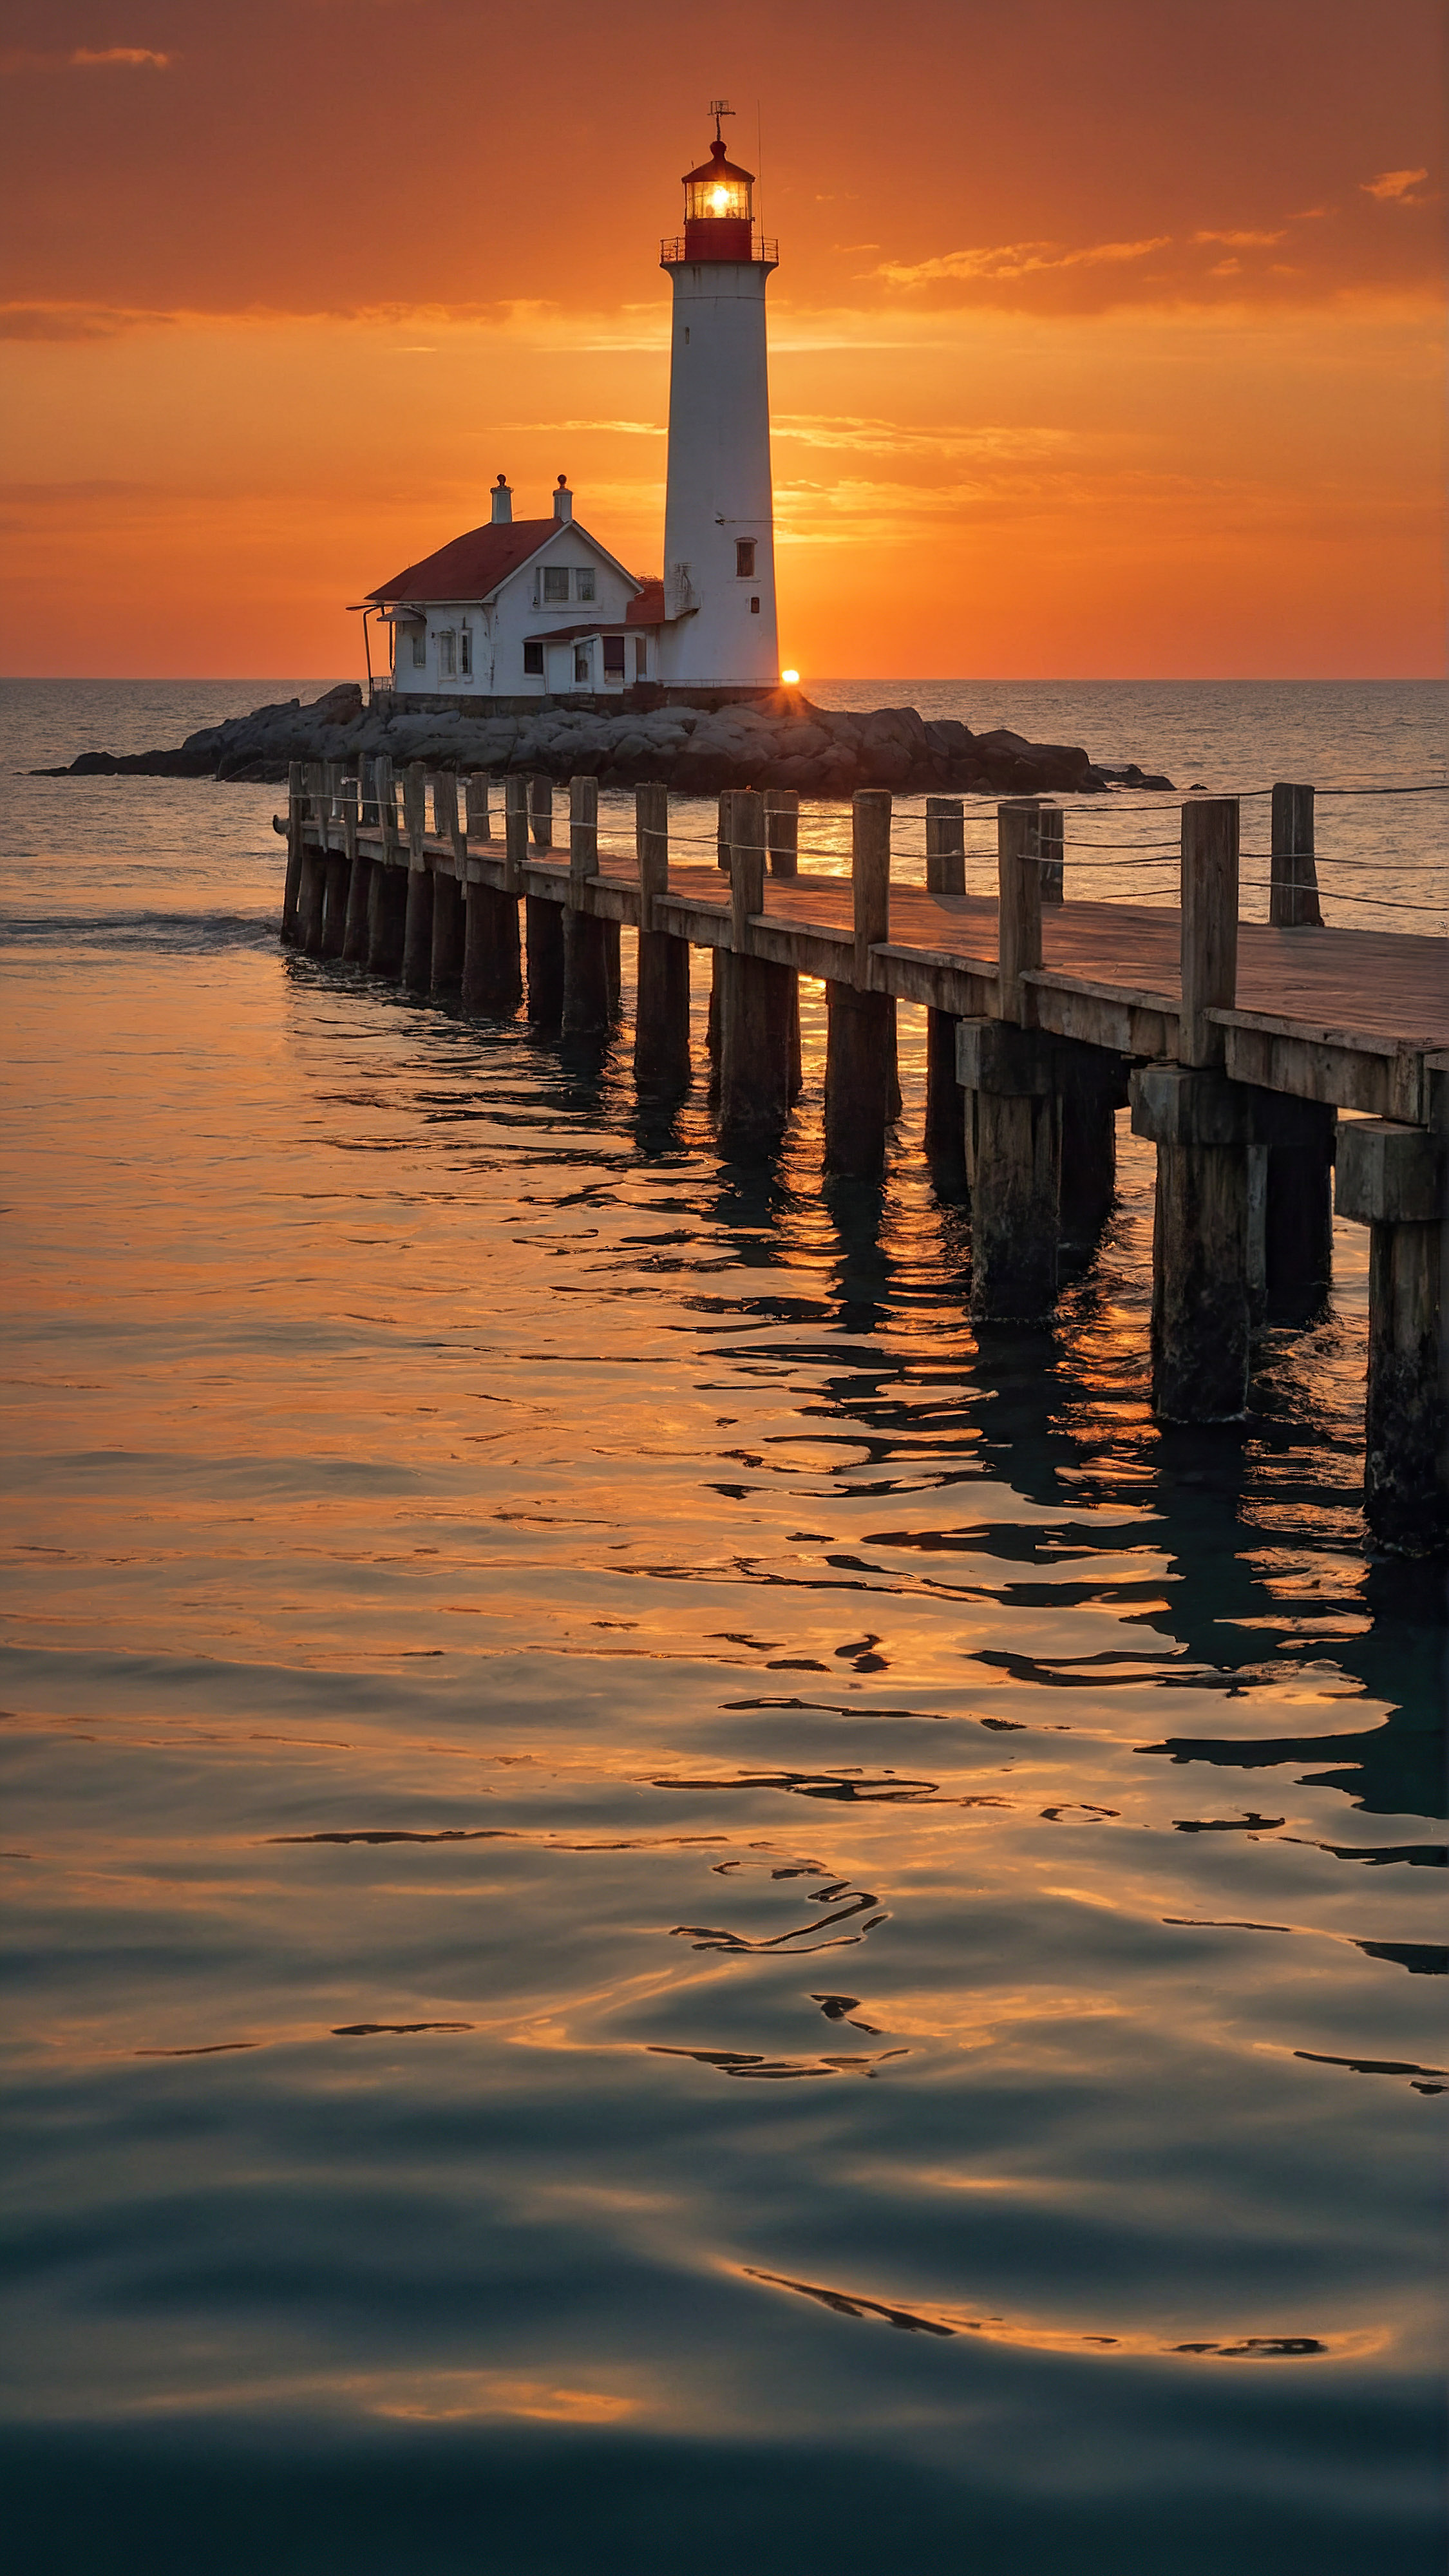 Get lost in the magic of the sunset with our iPhone wallpaper, showcasing a tranquil scene of a lighthouse at the end of a long pier, surrounded by the calm sea under an enchanting orange-hued sunset sky.